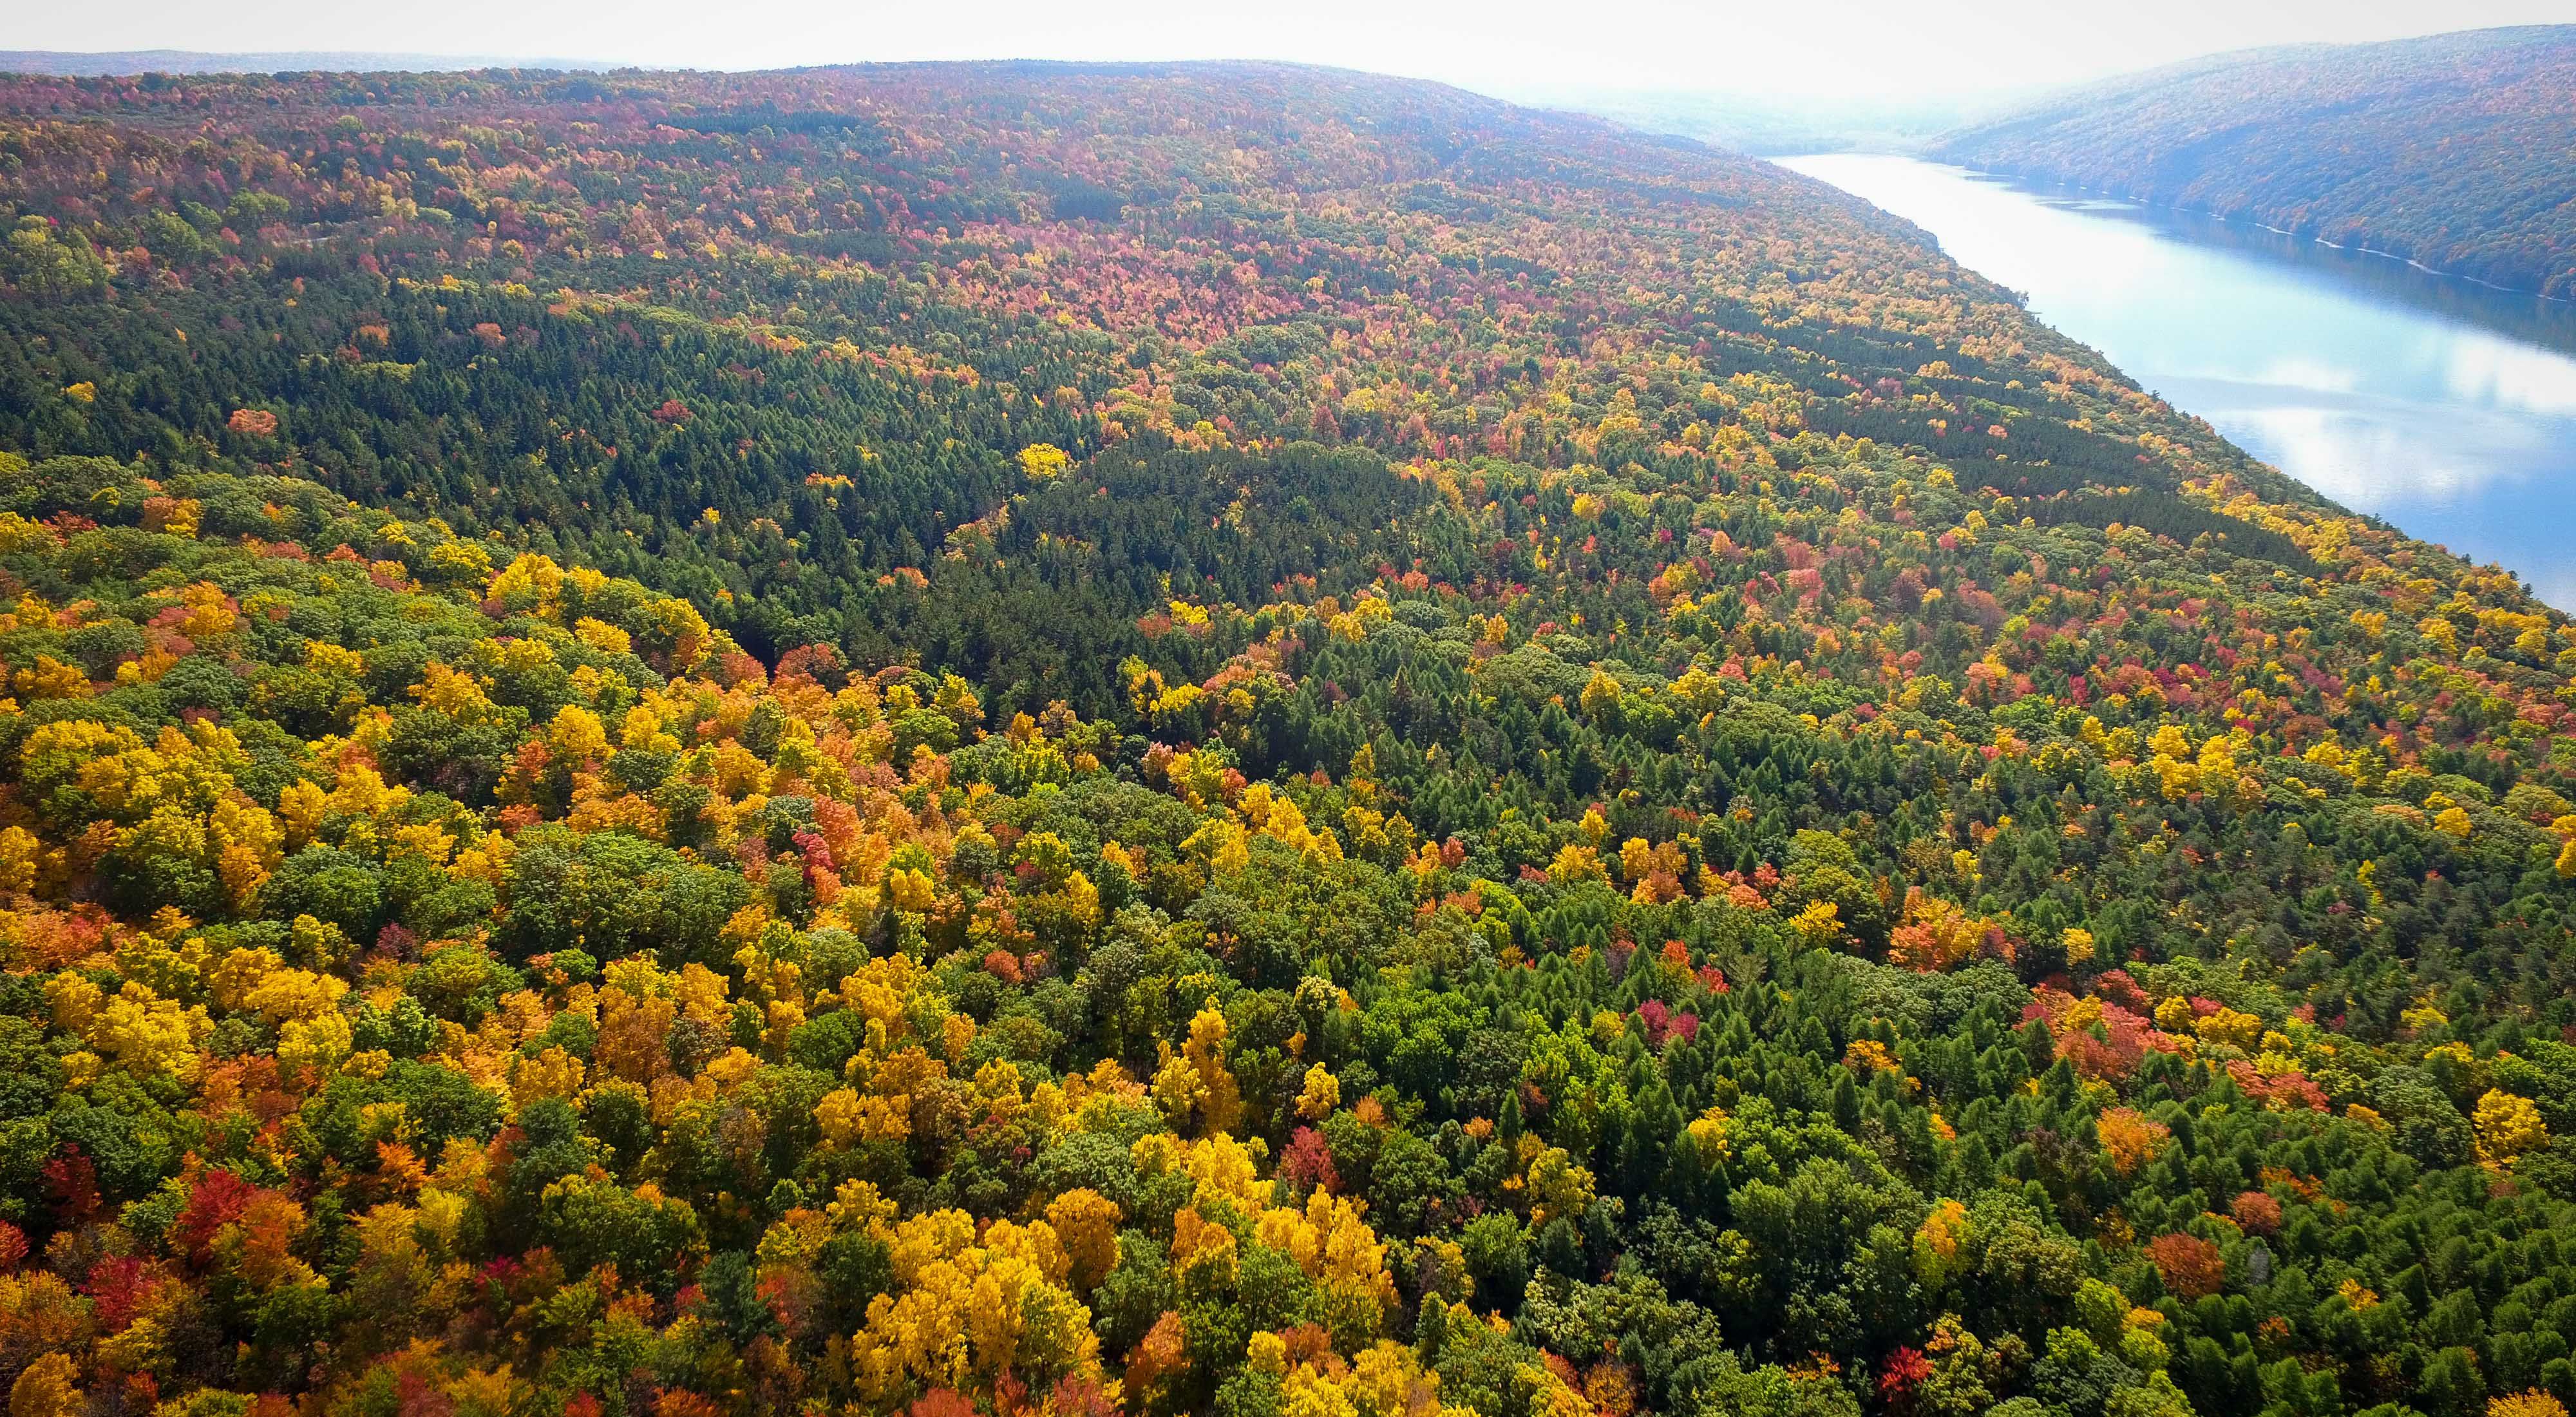 Bird's eye view of a forest with green, burnt orange, and yellow trees and a river on the upper righthand side.